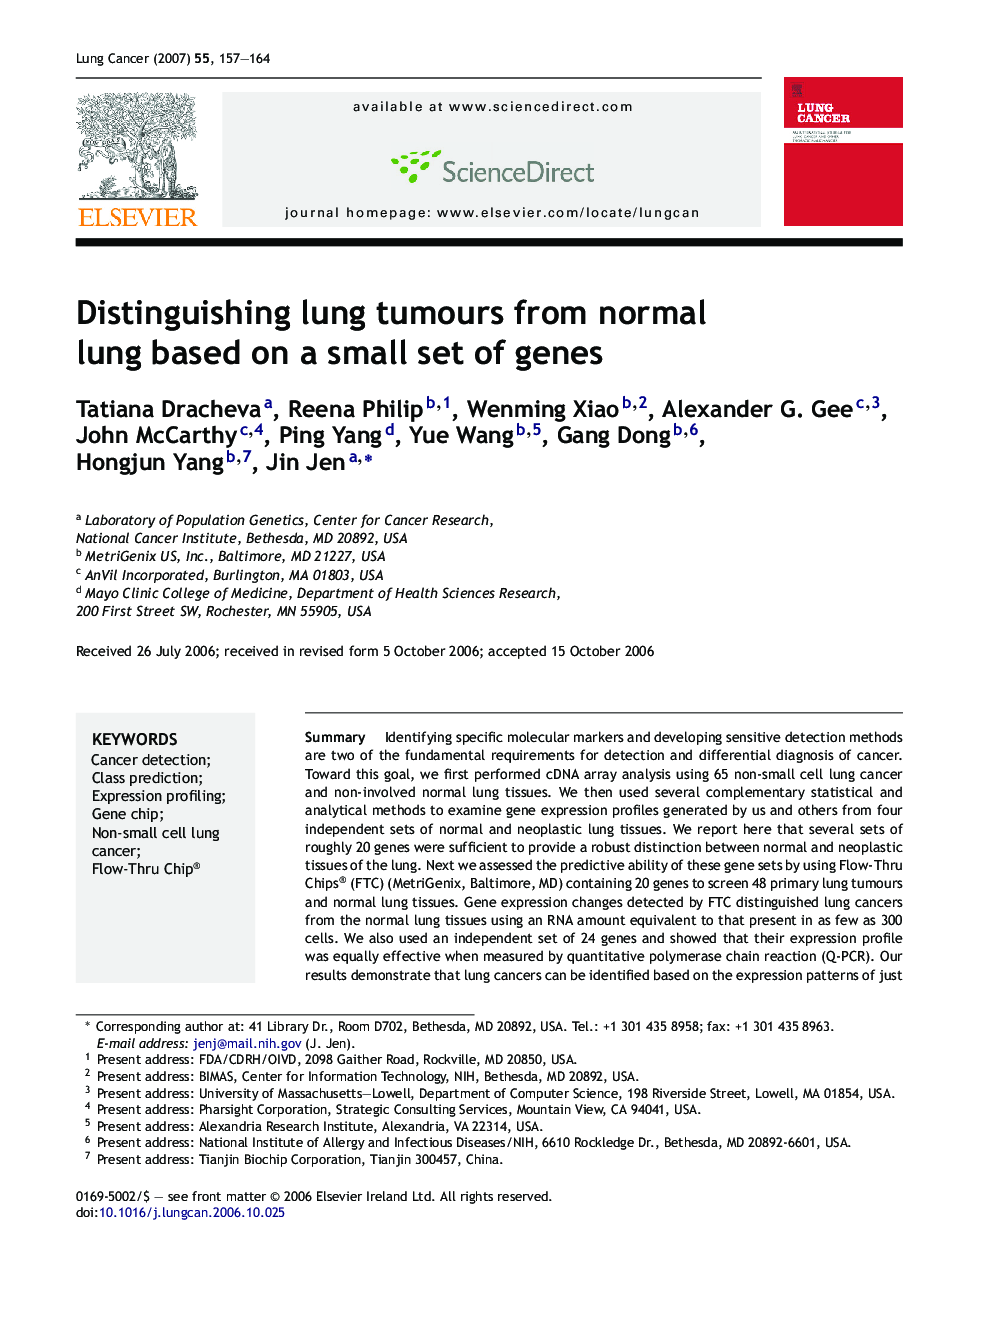 Distinguishing lung tumours from normal lung based on a small set of genes